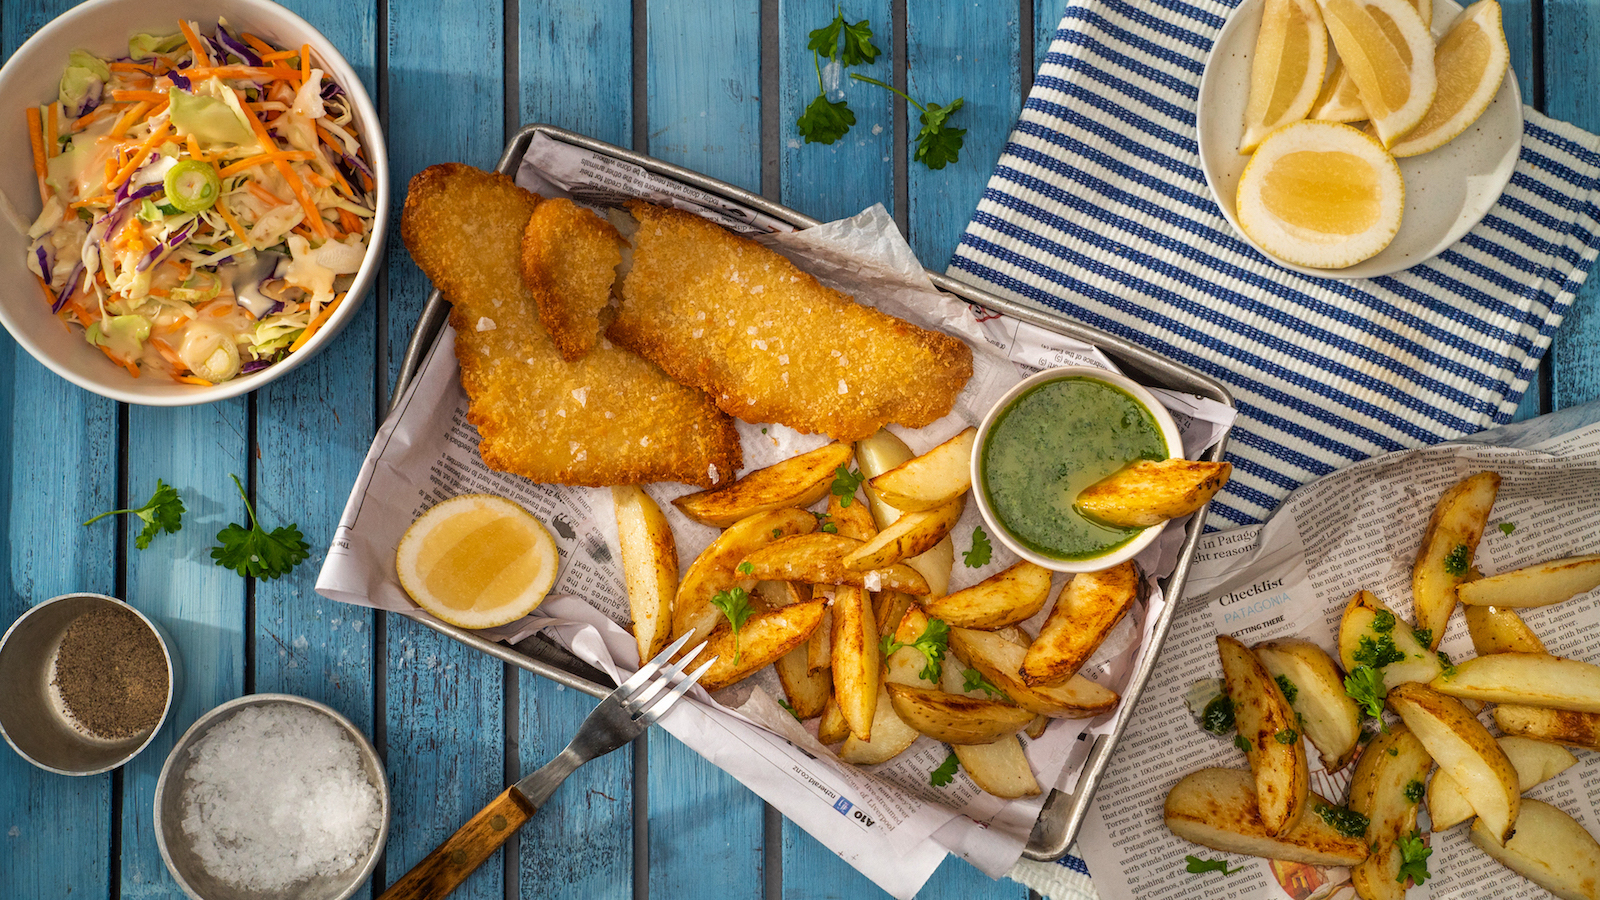 Crumbed fish fillets with potato wedges on a tray, lemon slices, green herb sauce, and a bowl of coleslaw